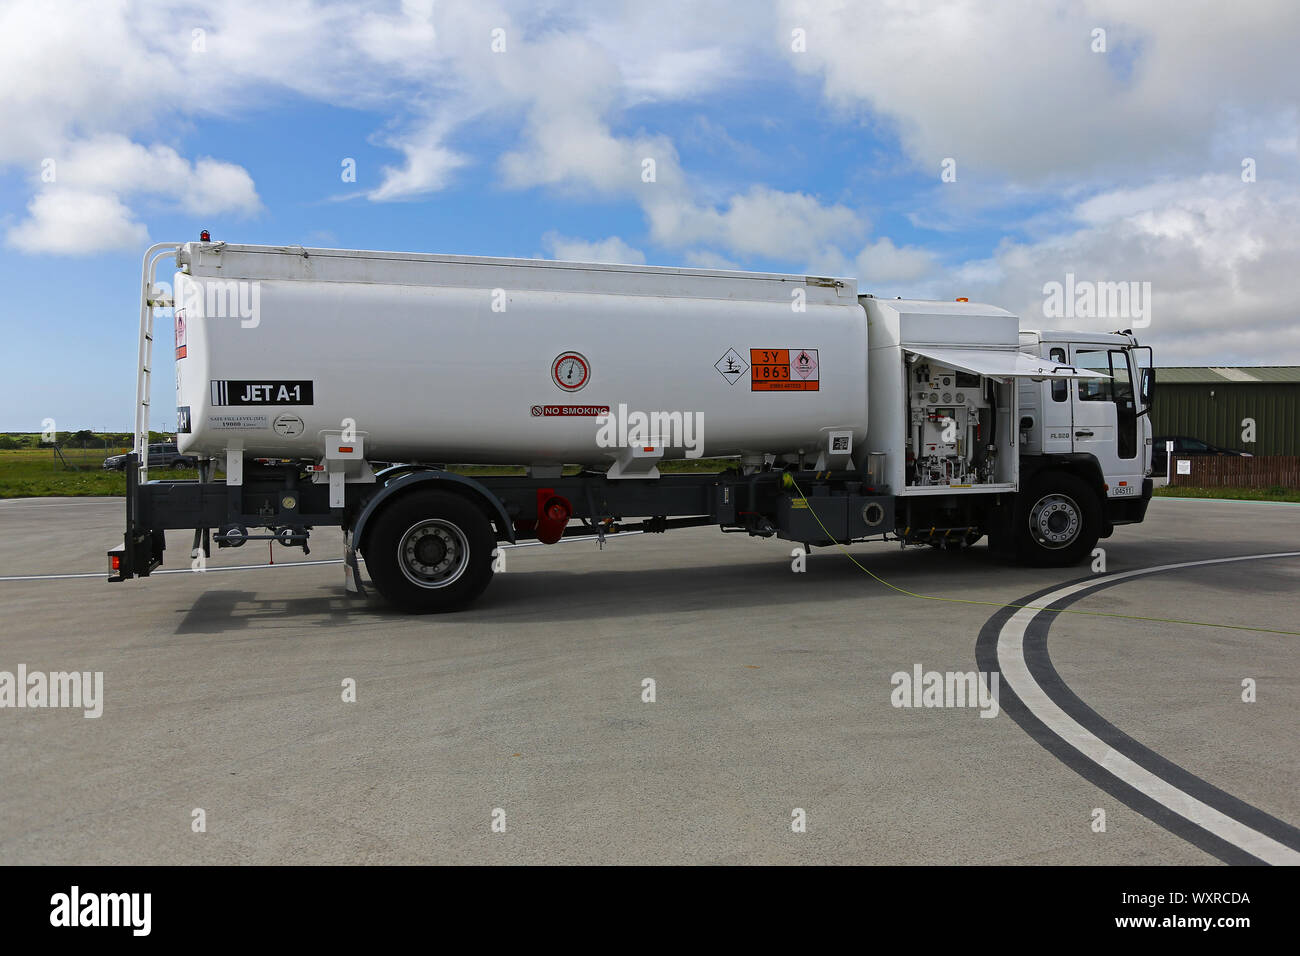 An aviation fuel tanker at St Marys Airport, St Marys Island, Isles of Scilly, Cornwall, England, UK Stock Photo